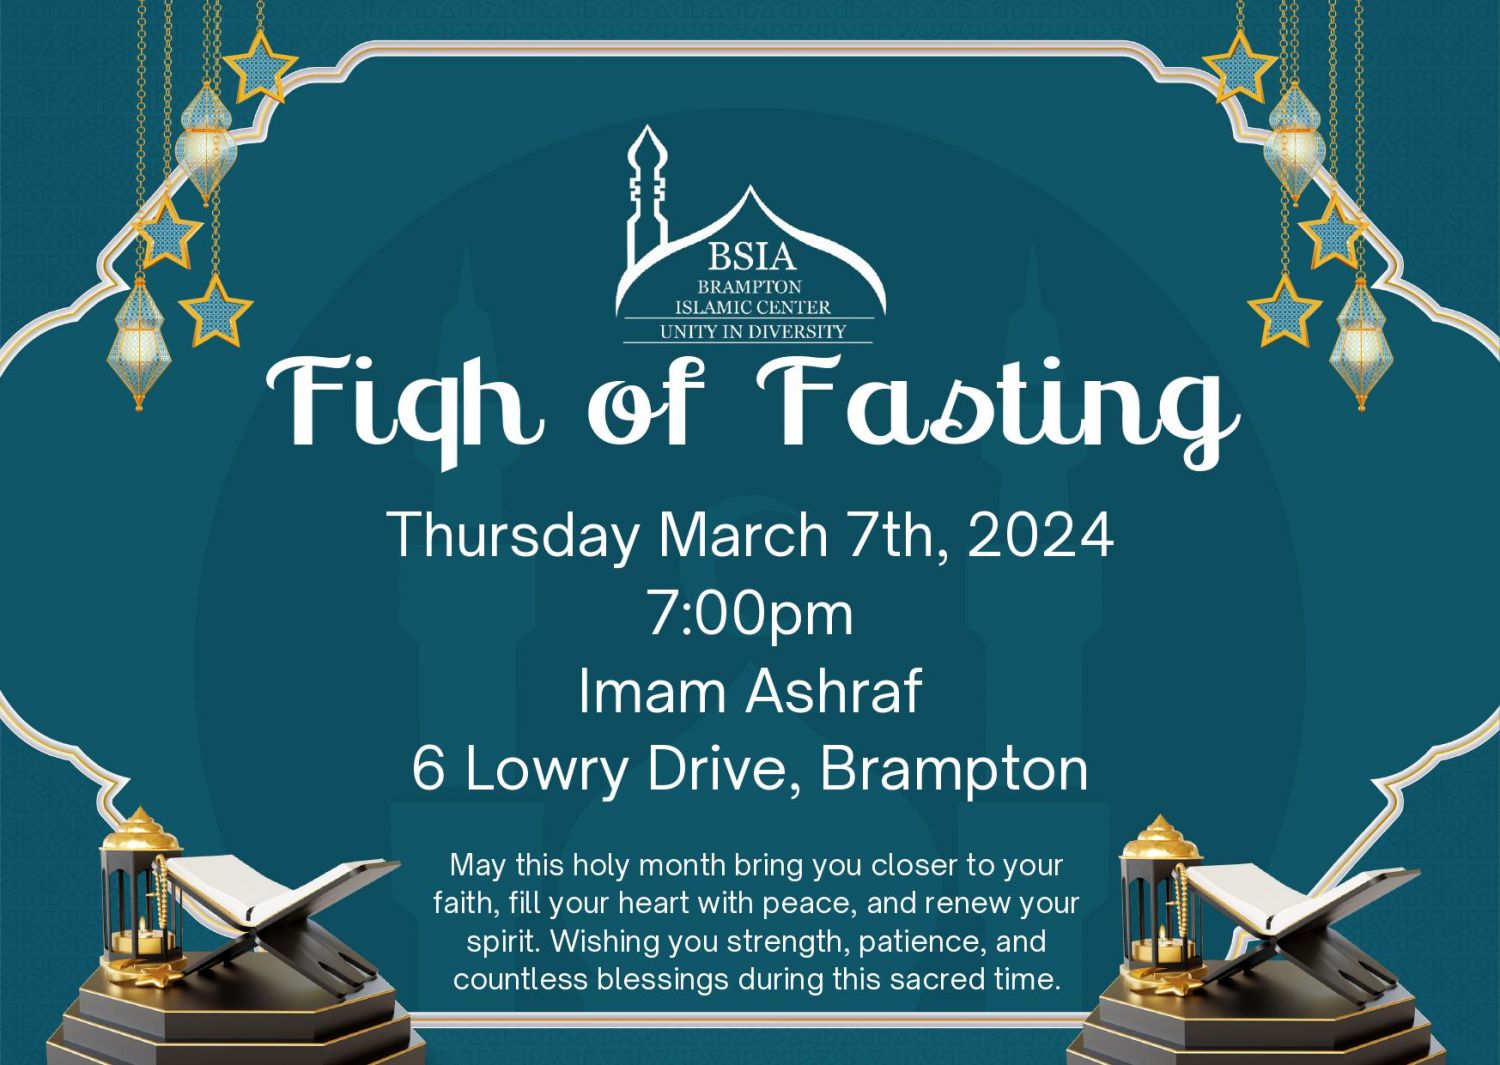 Fiqh of Fasting 2024